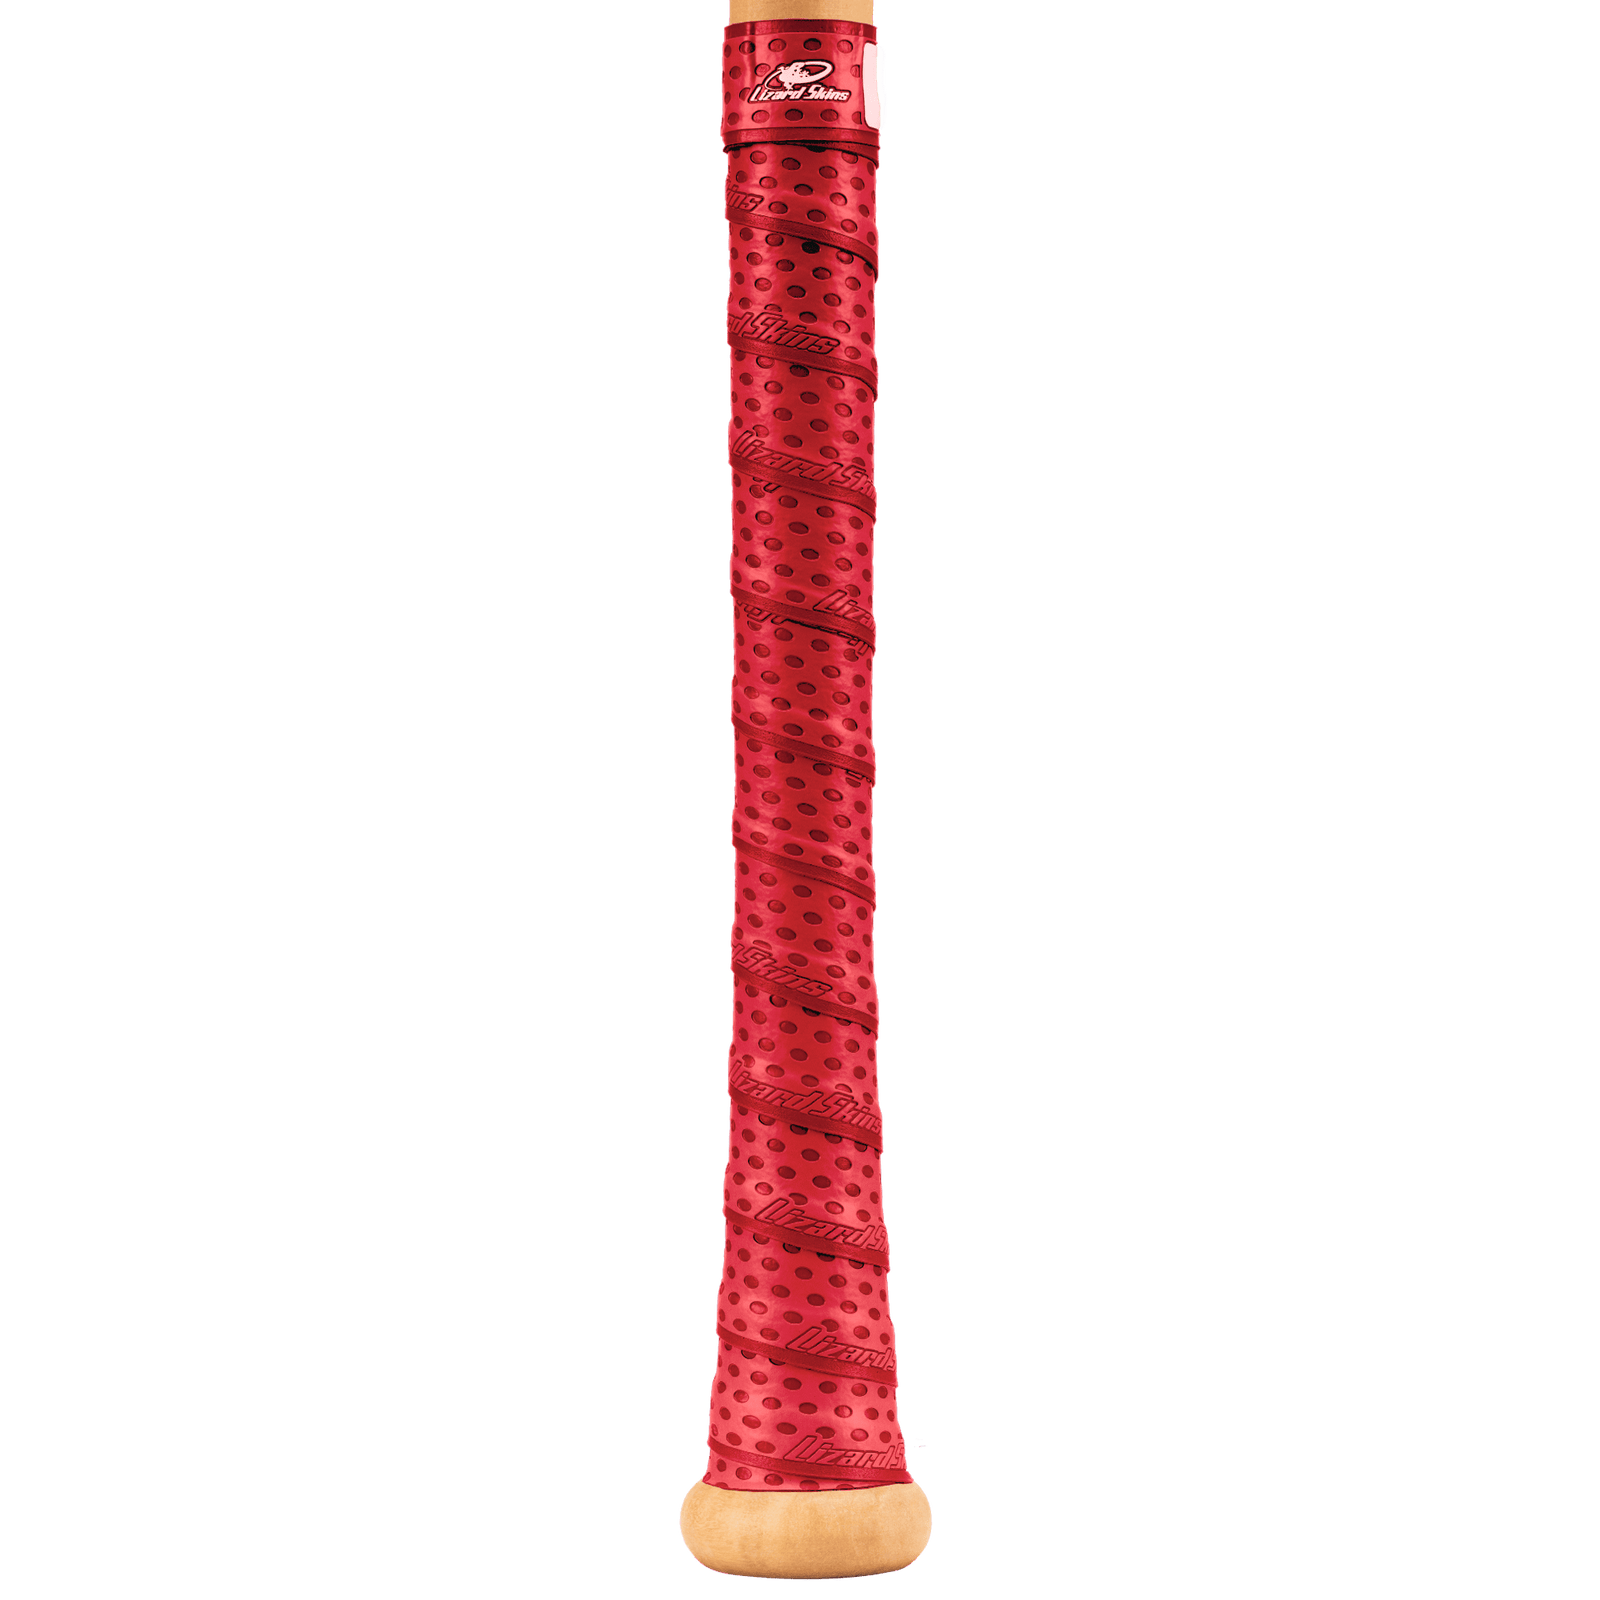 Champro Sports Extreme Tack Bat Grip Tape, Camo Red, White, and Blue